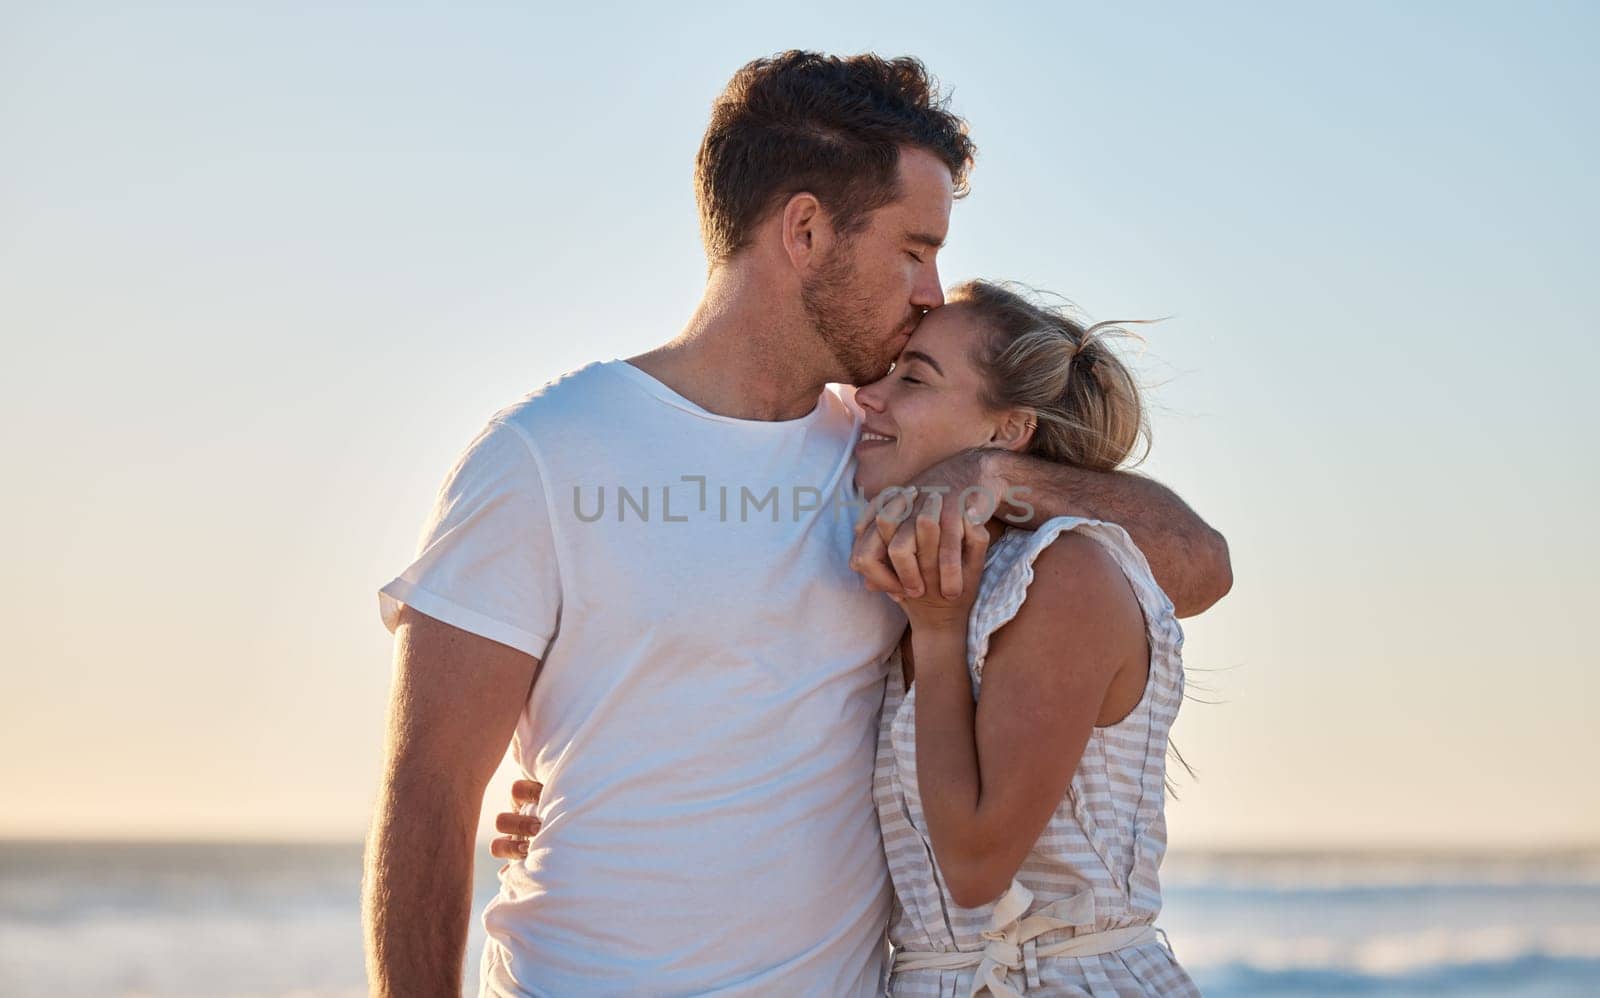 Love, summer and couple kiss at beach for intimacy, romance and loving relationship on honeymoon. Dating, affection and man and woman bonding and enjoy holiday, vacation and weekend together by ocean.